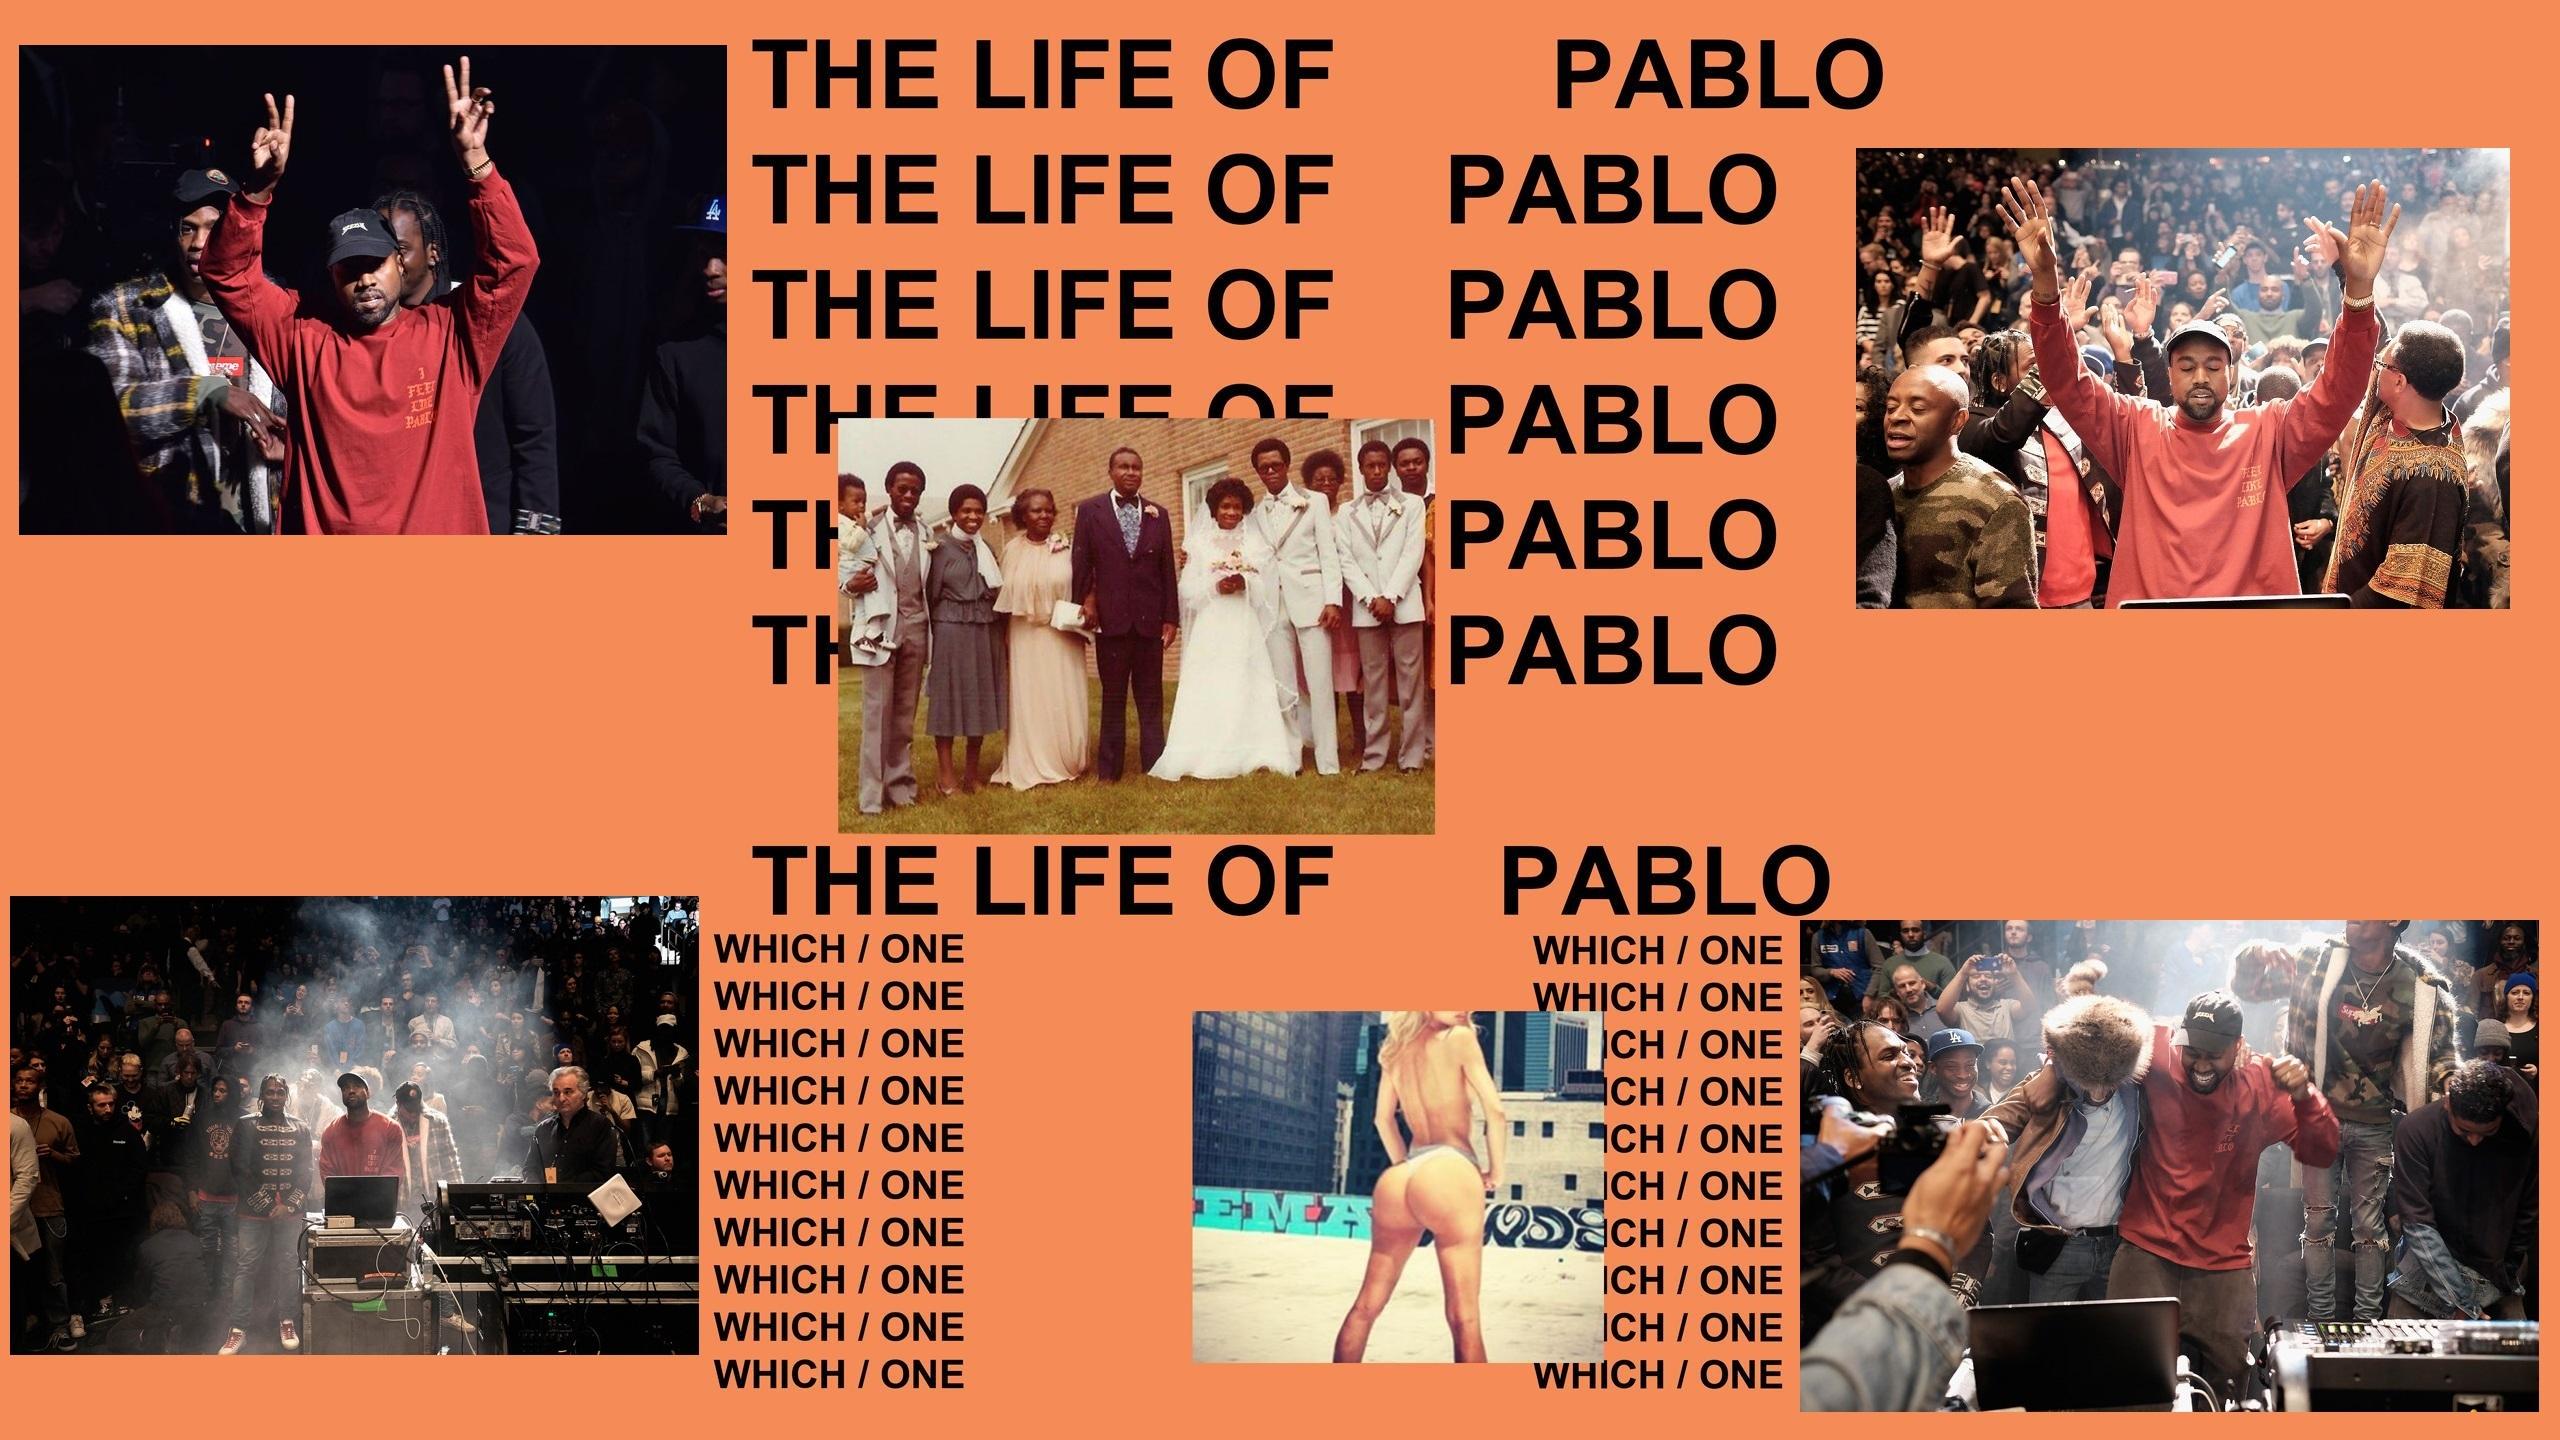 The Life of Pablo Wallpaper Free The Life of Pablo Background